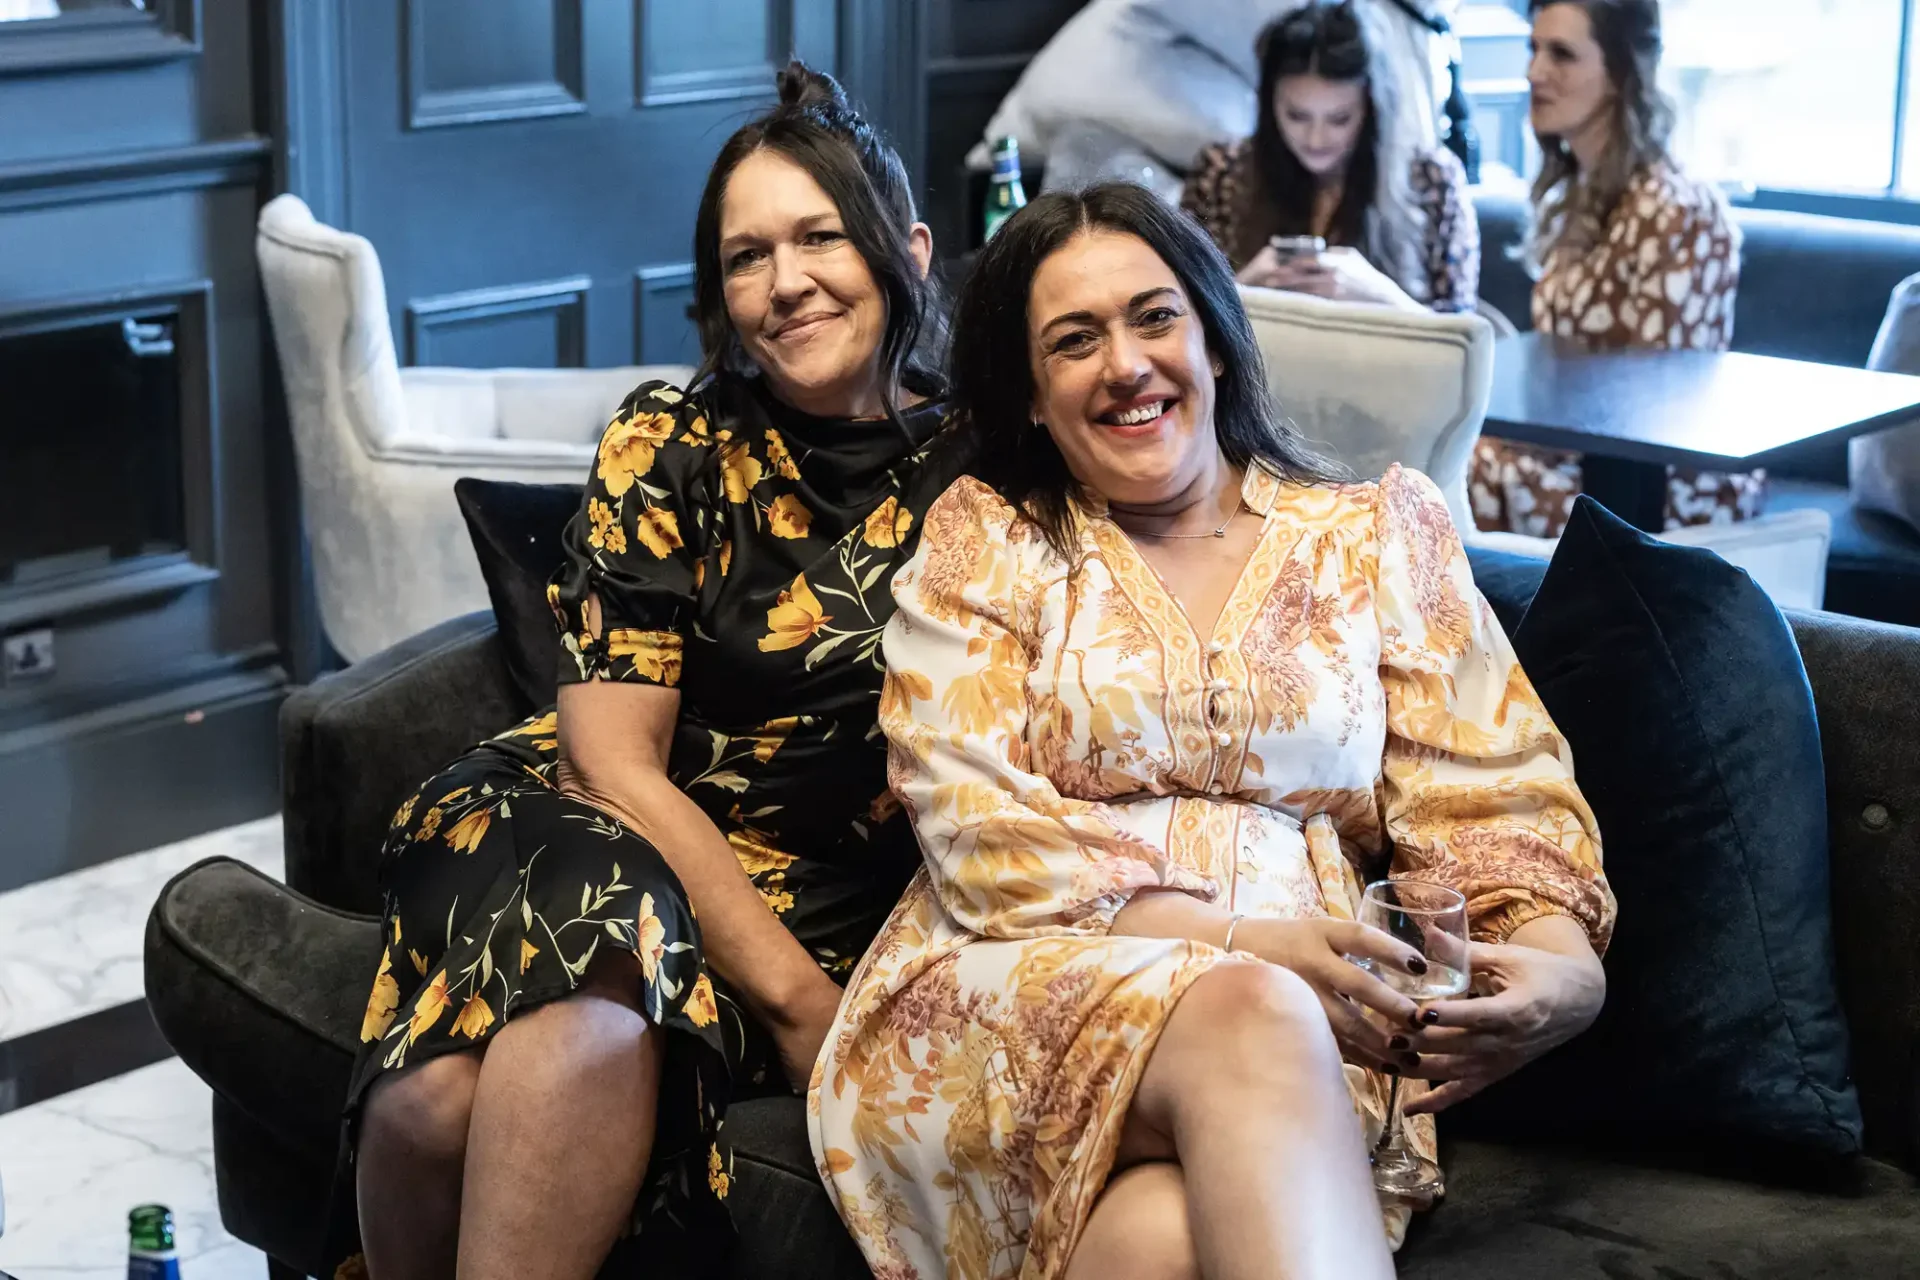 Two women smiling and sitting on a couch in a lounge, one wearing a black floral dress and the other in a cream floral dress.